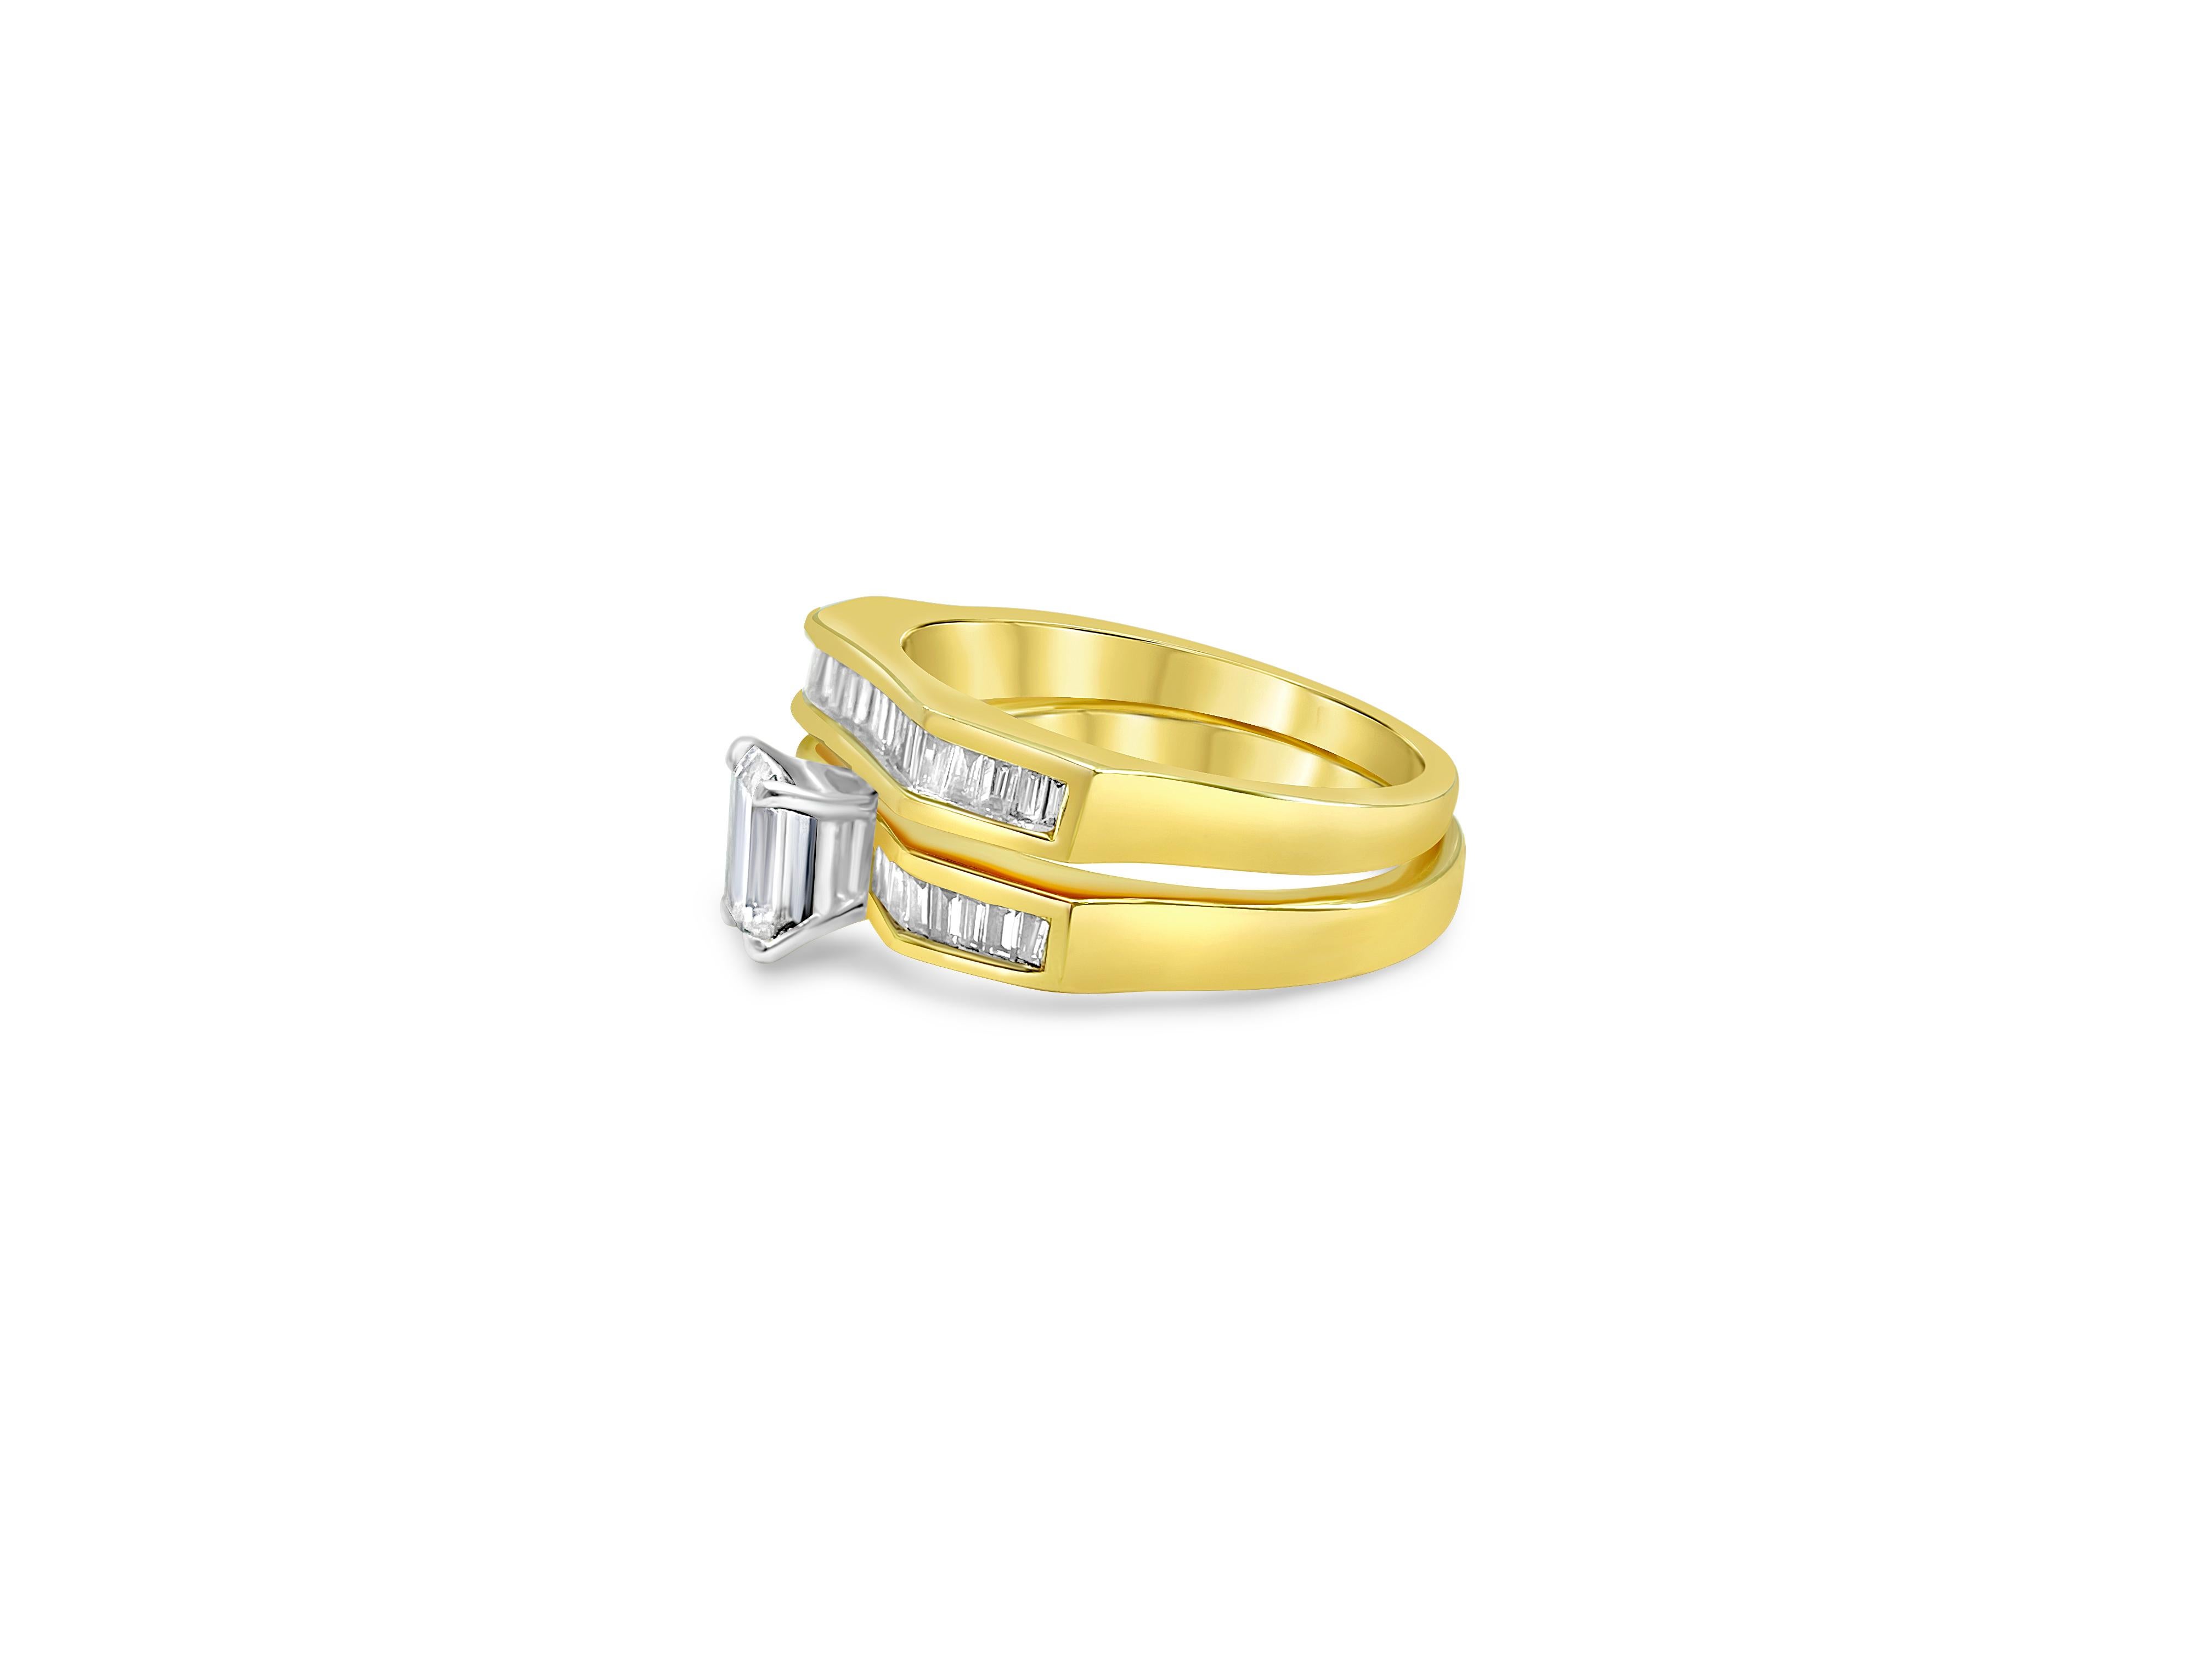 Crafted from 14k yellow gold, this exquisite women's diamond ring set features a total of 2.30 carats of baguette-cut diamonds. With VS clarity and F color, these diamonds shimmer with brilliance and clarity. The set weighs 6.56 grams and is